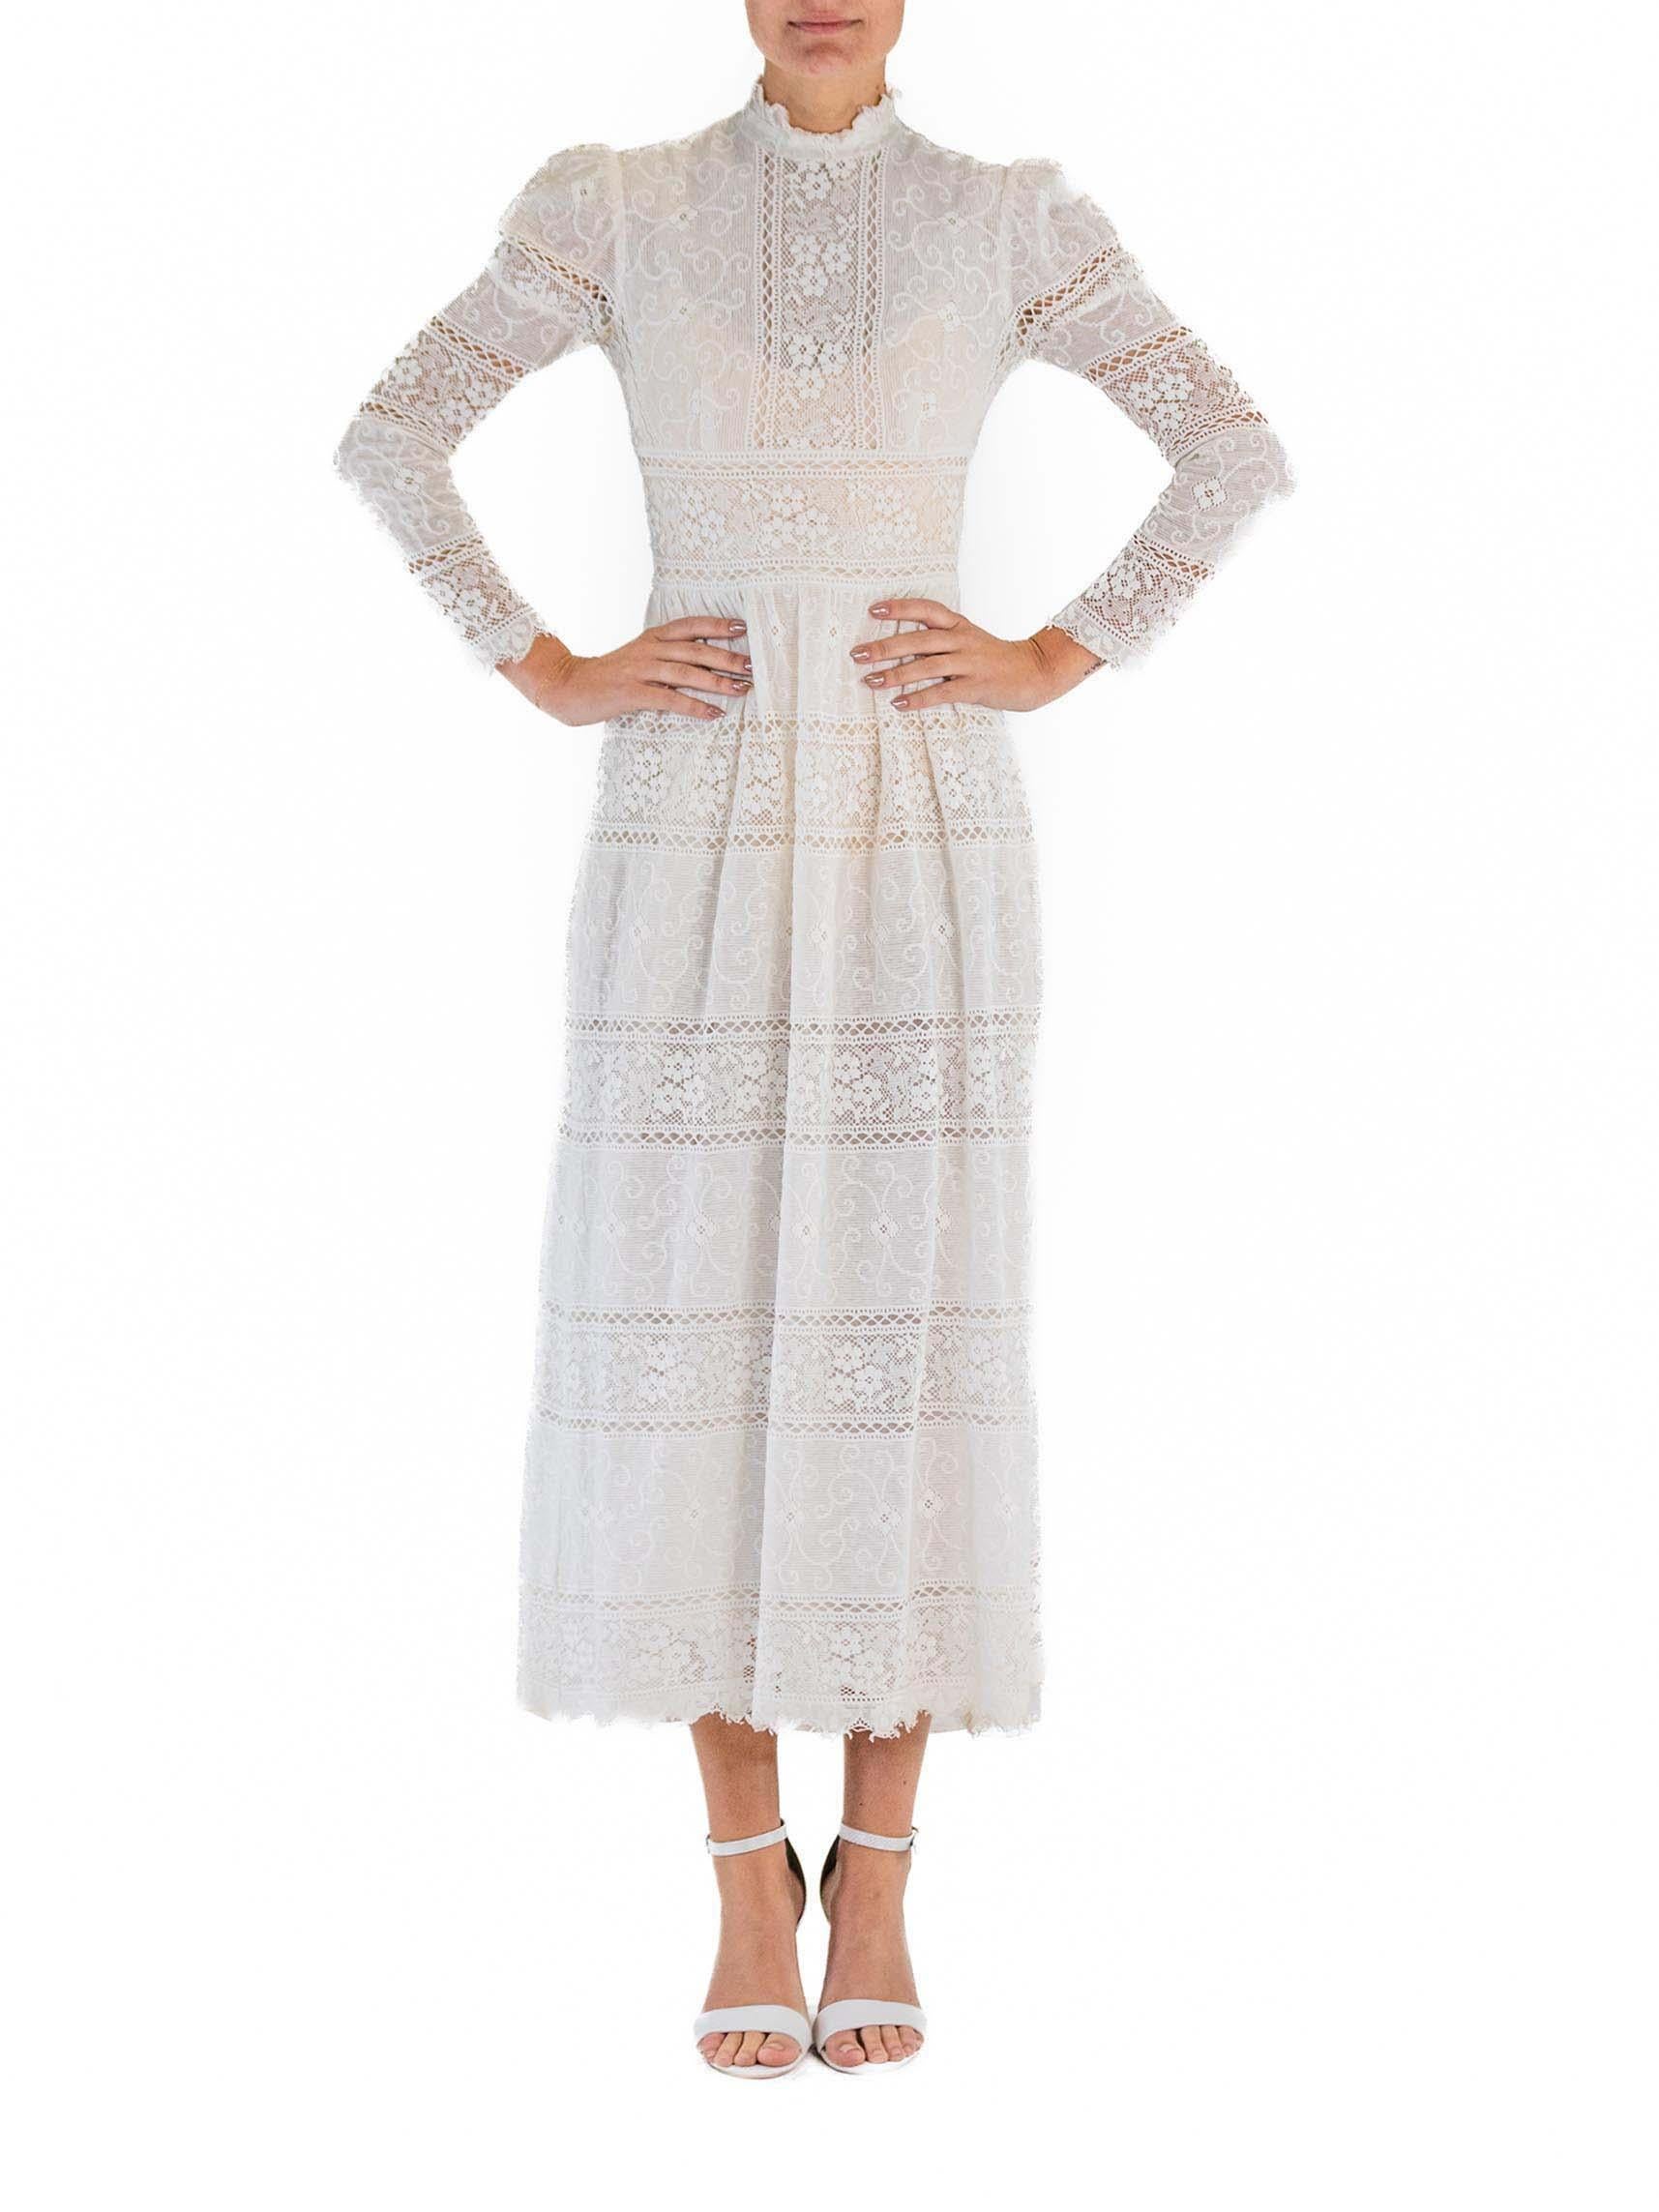 1970S White Victorian Revival Lace Long Sleeved Dress For Sale 2